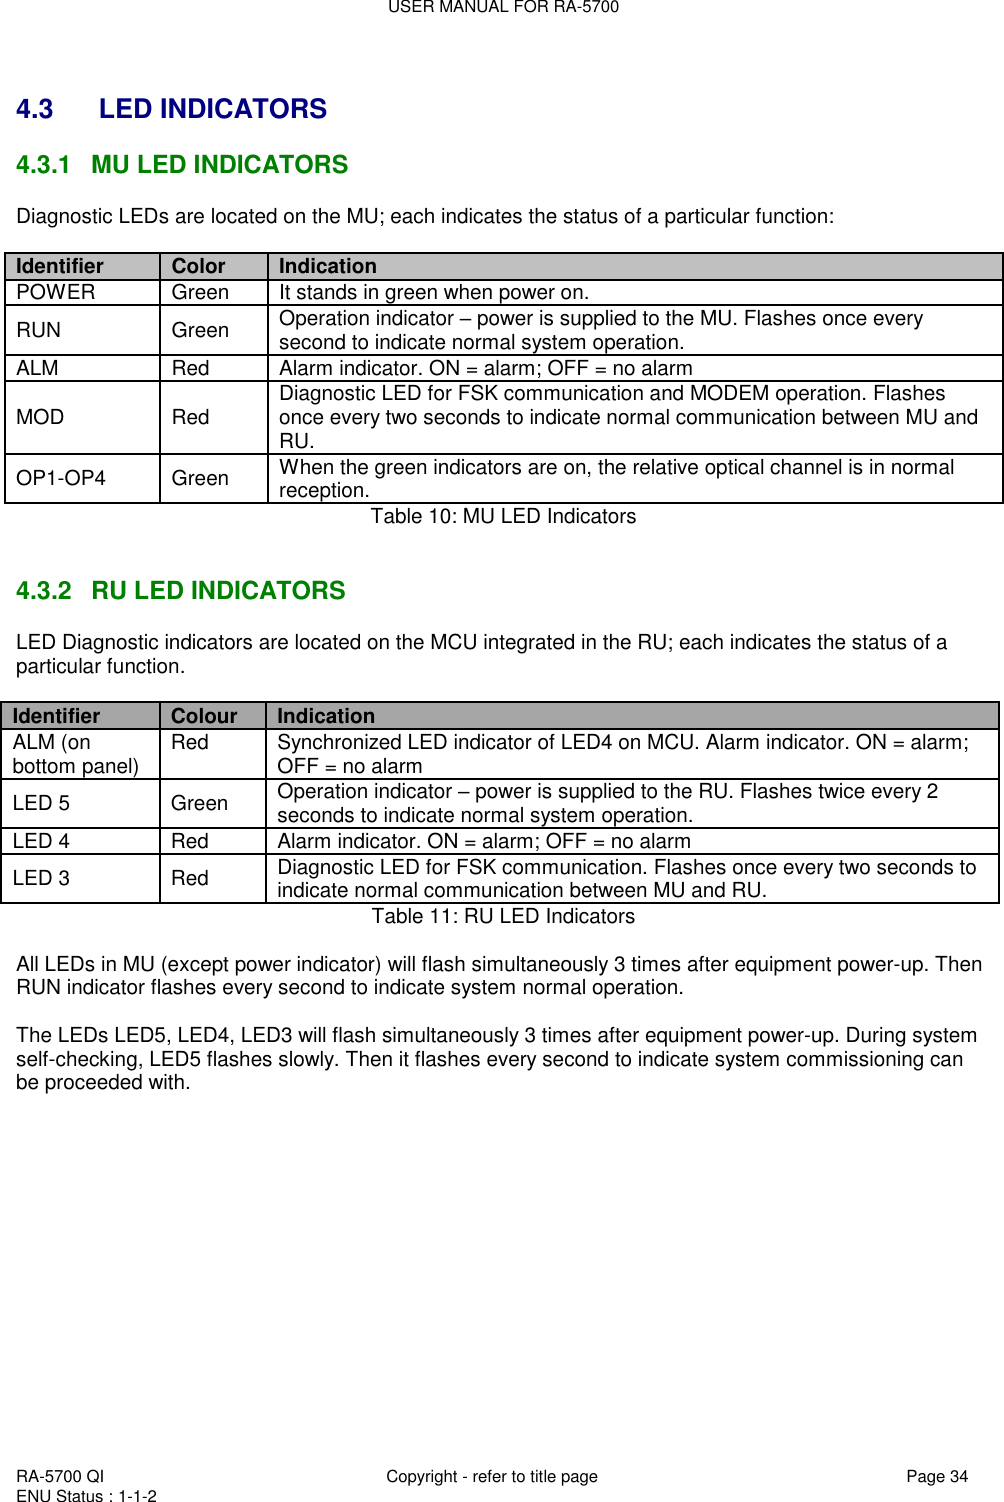 USER MANUAL FOR RA-5700  RA-5700 QI  Copyright - refer to title page Page 34 ENU Status : 1-1-2     4.3   LED INDICATORS 4.3.1  MU LED INDICATORS Diagnostic LEDs are located on the MU; each indicates the status of a particular function:  Identifier Color Indication POWER Green  It stands in green when power on.  RUN Green Operation indicator – power is supplied to the MU. Flashes once every second to indicate normal system operation.  ALM Red Alarm indicator. ON = alarm; OFF = no alarm MOD Red Diagnostic LED for FSK communication and MODEM operation. Flashes once every two seconds to indicate normal communication between MU and RU. OP1-OP4 Green When the green indicators are on, the relative optical channel is in normal reception. Table 10: MU LED Indicators   4.3.2  RU LED INDICATORS LED Diagnostic indicators are located on the MCU integrated in the RU; each indicates the status of a particular function.  Identifier Colour Indication ALM (on bottom panel) Red  Synchronized LED indicator of LED4 on MCU. Alarm indicator. ON = alarm; OFF = no alarm LED 5 Green  Operation indicator – power is supplied to the RU. Flashes twice every 2 seconds to indicate normal system operation. LED 4 Red Alarm indicator. ON = alarm; OFF = no alarm LED 3 Red Diagnostic LED for FSK communication. Flashes once every two seconds to indicate normal communication between MU and RU. Table 11: RU LED Indicators  All LEDs in MU (except power indicator) will flash simultaneously 3 times after equipment power-up. Then RUN indicator flashes every second to indicate system normal operation.  The LEDs LED5, LED4, LED3 will flash simultaneously 3 times after equipment power-up. During system self-checking, LED5 flashes slowly. Then it flashes every second to indicate system commissioning can be proceeded with. 